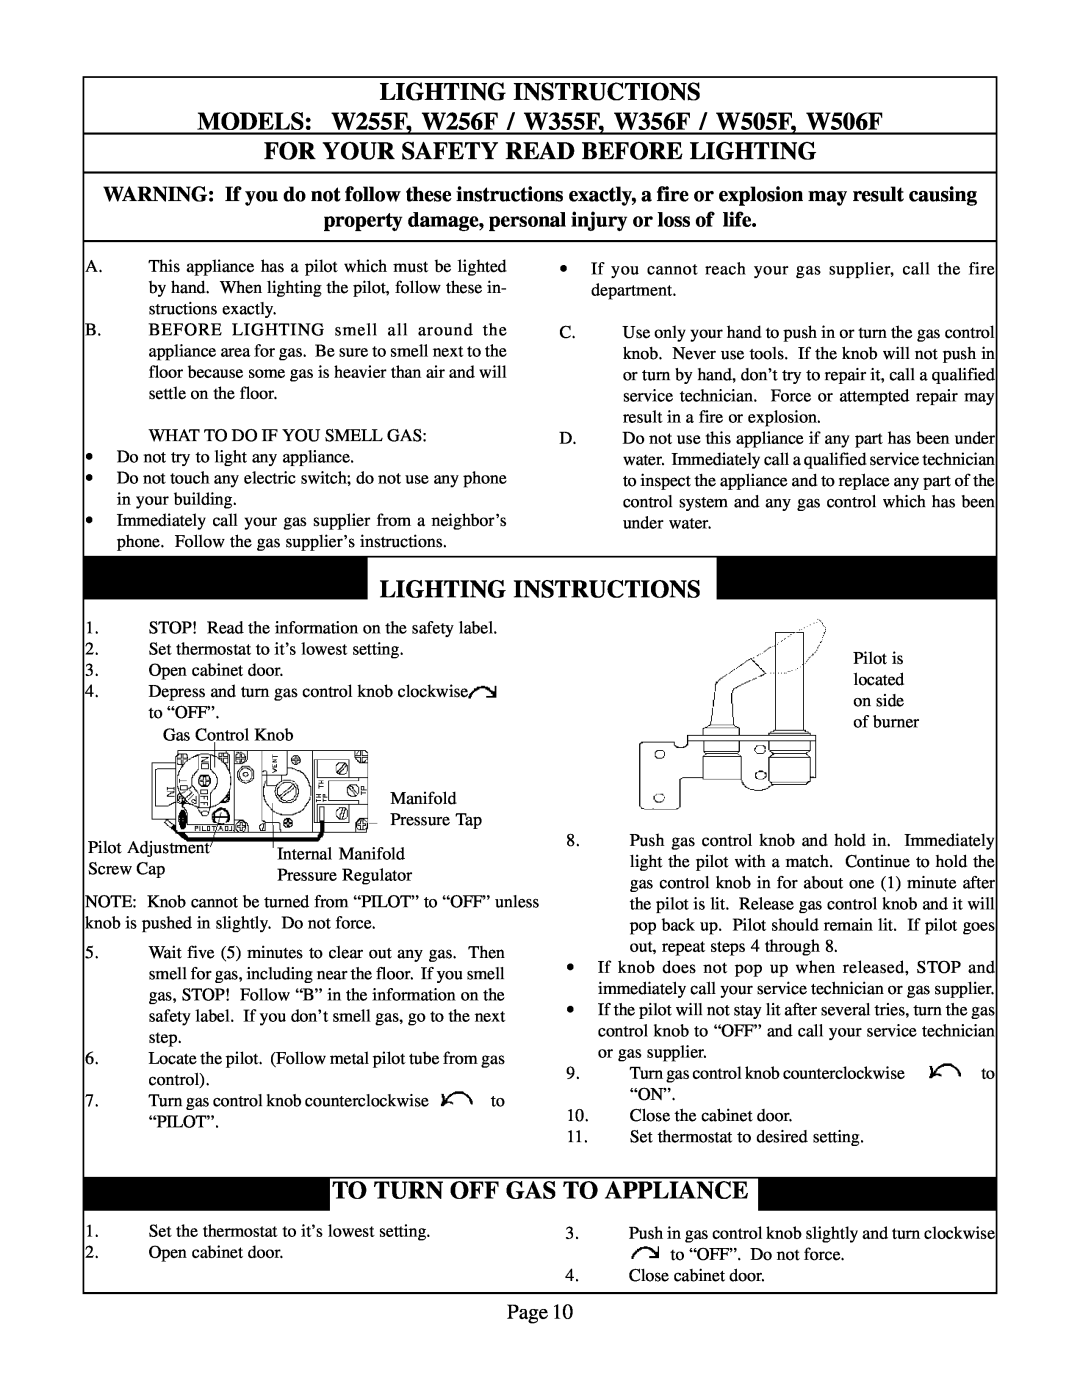 Louisville Tin and Stove W502F W255F, W506, W351F, W355F, W356F Lighting Instructions, For Your Safety Read Before Lighting 